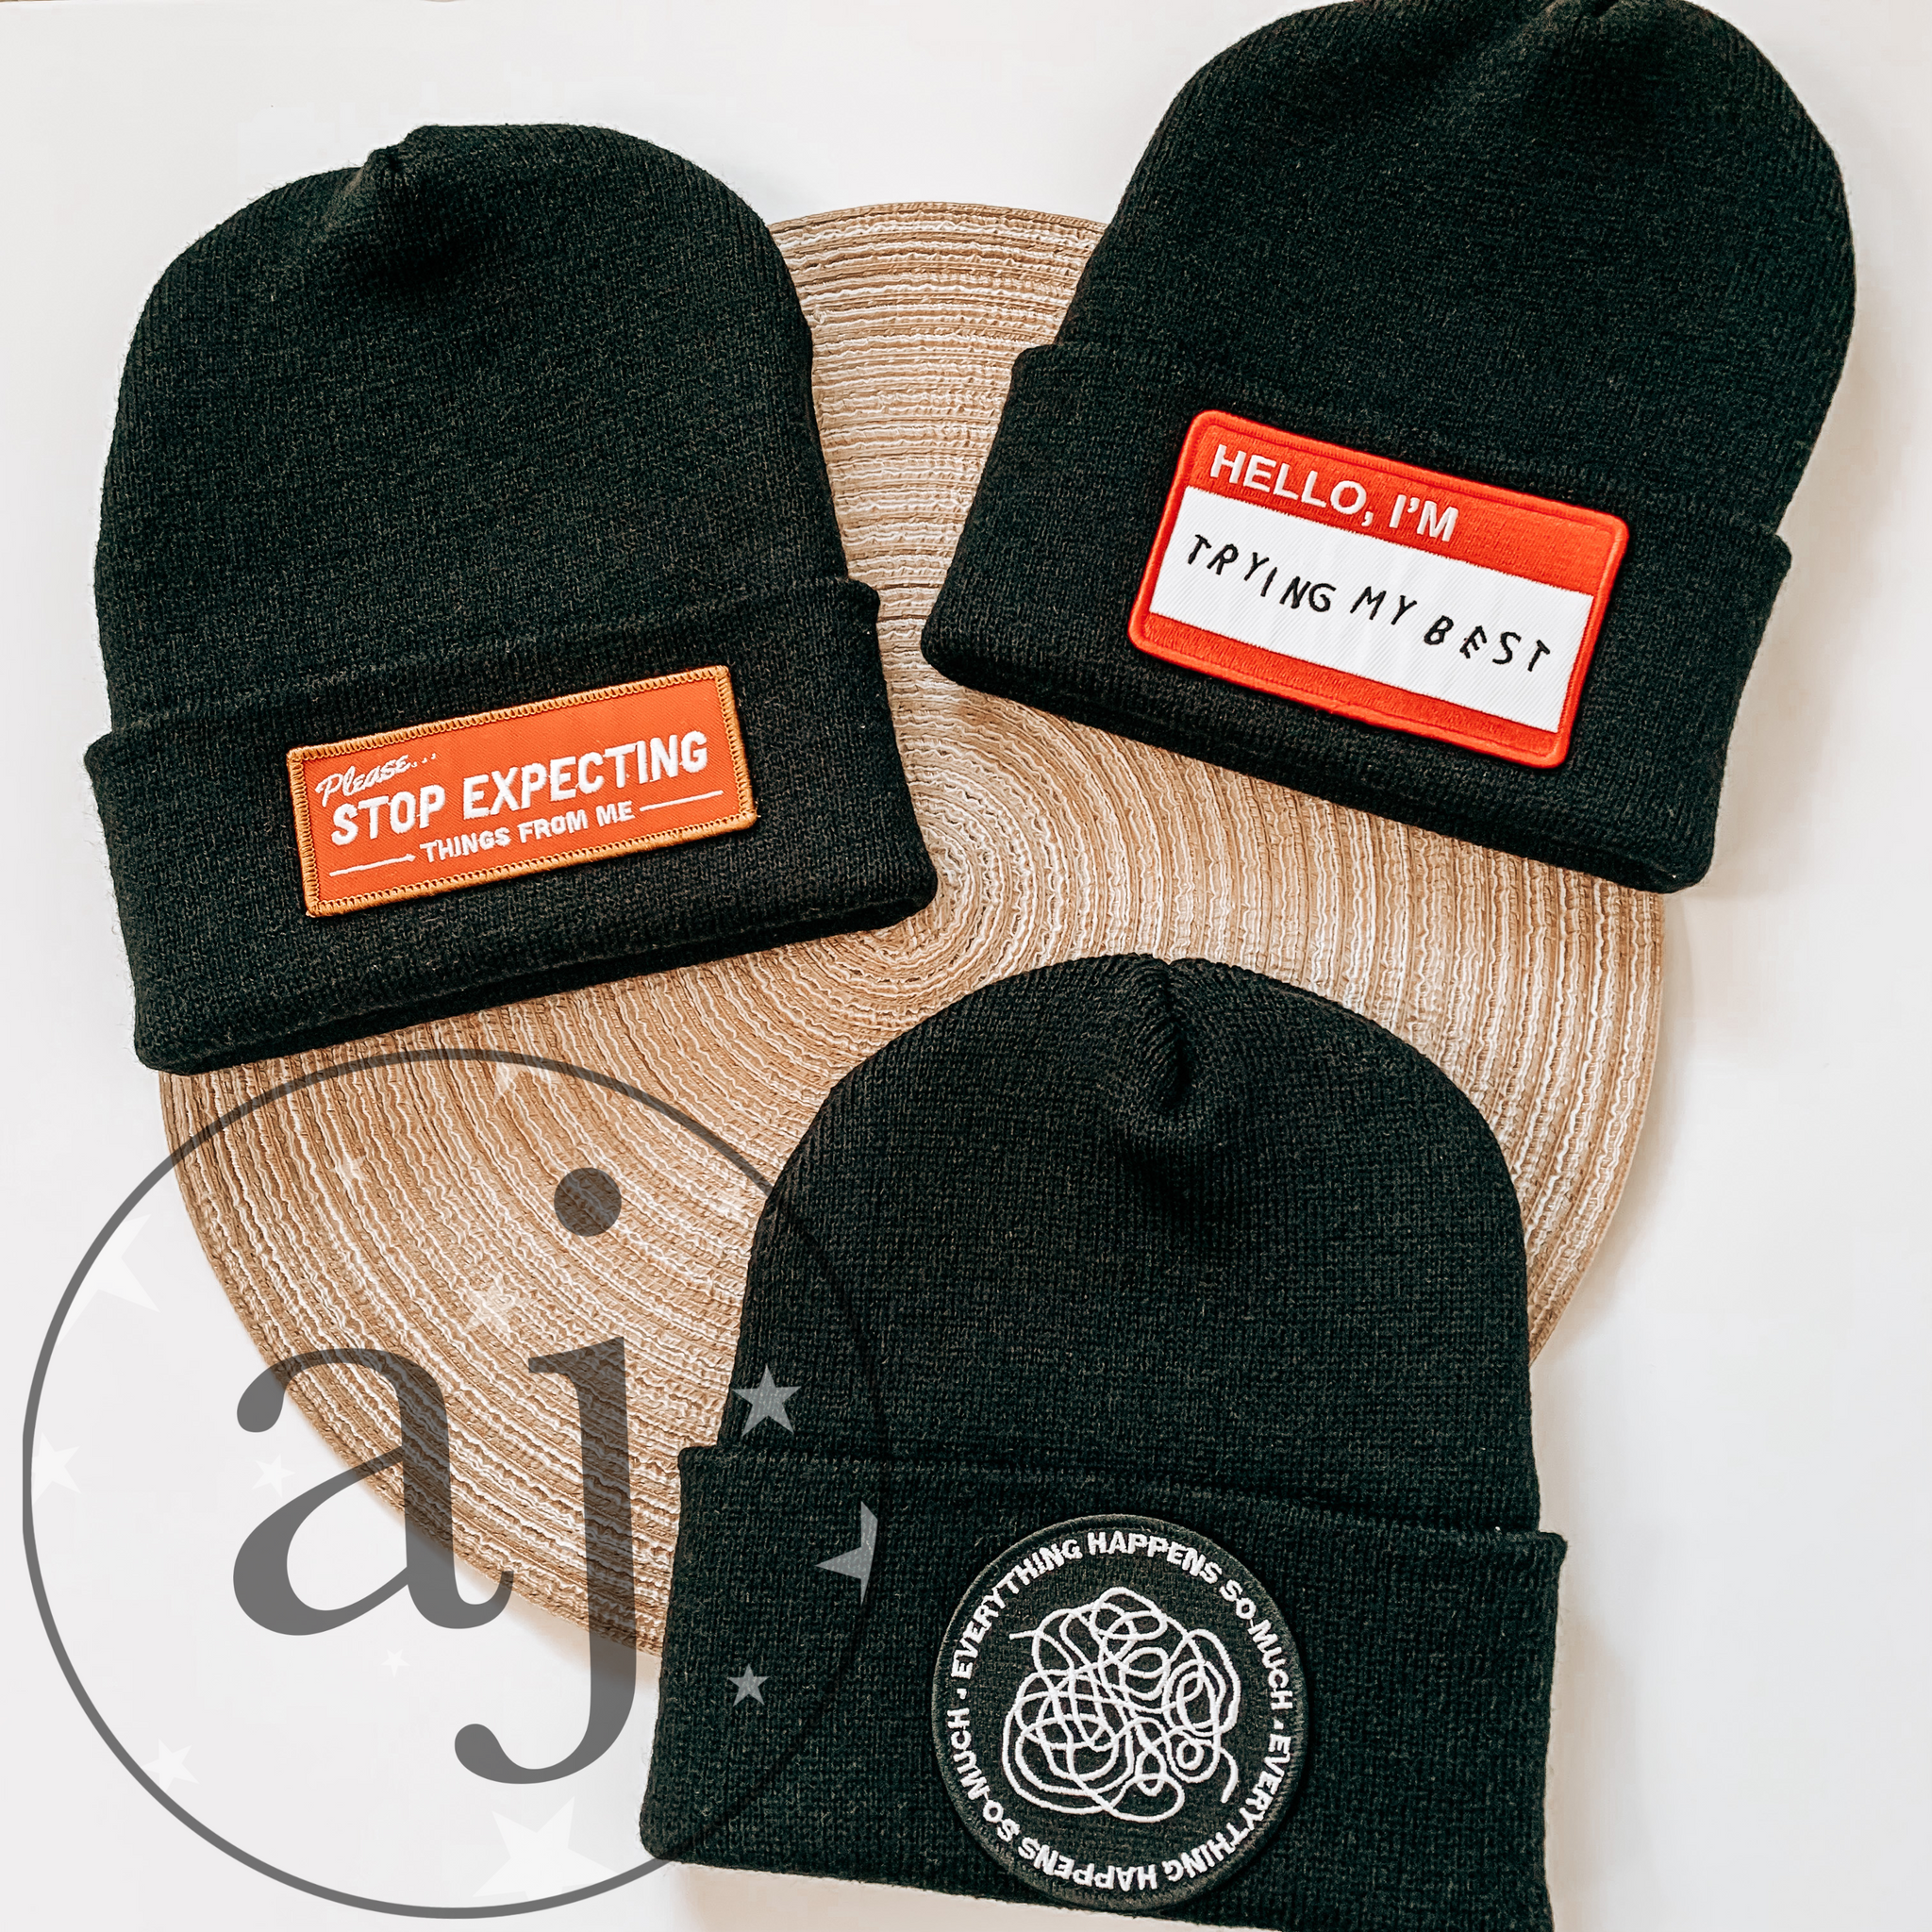 Embroidered Patch Beanies | Everything Happens So Much | Please Stop Expecting Things From Me | Hello I'm Trying My Best